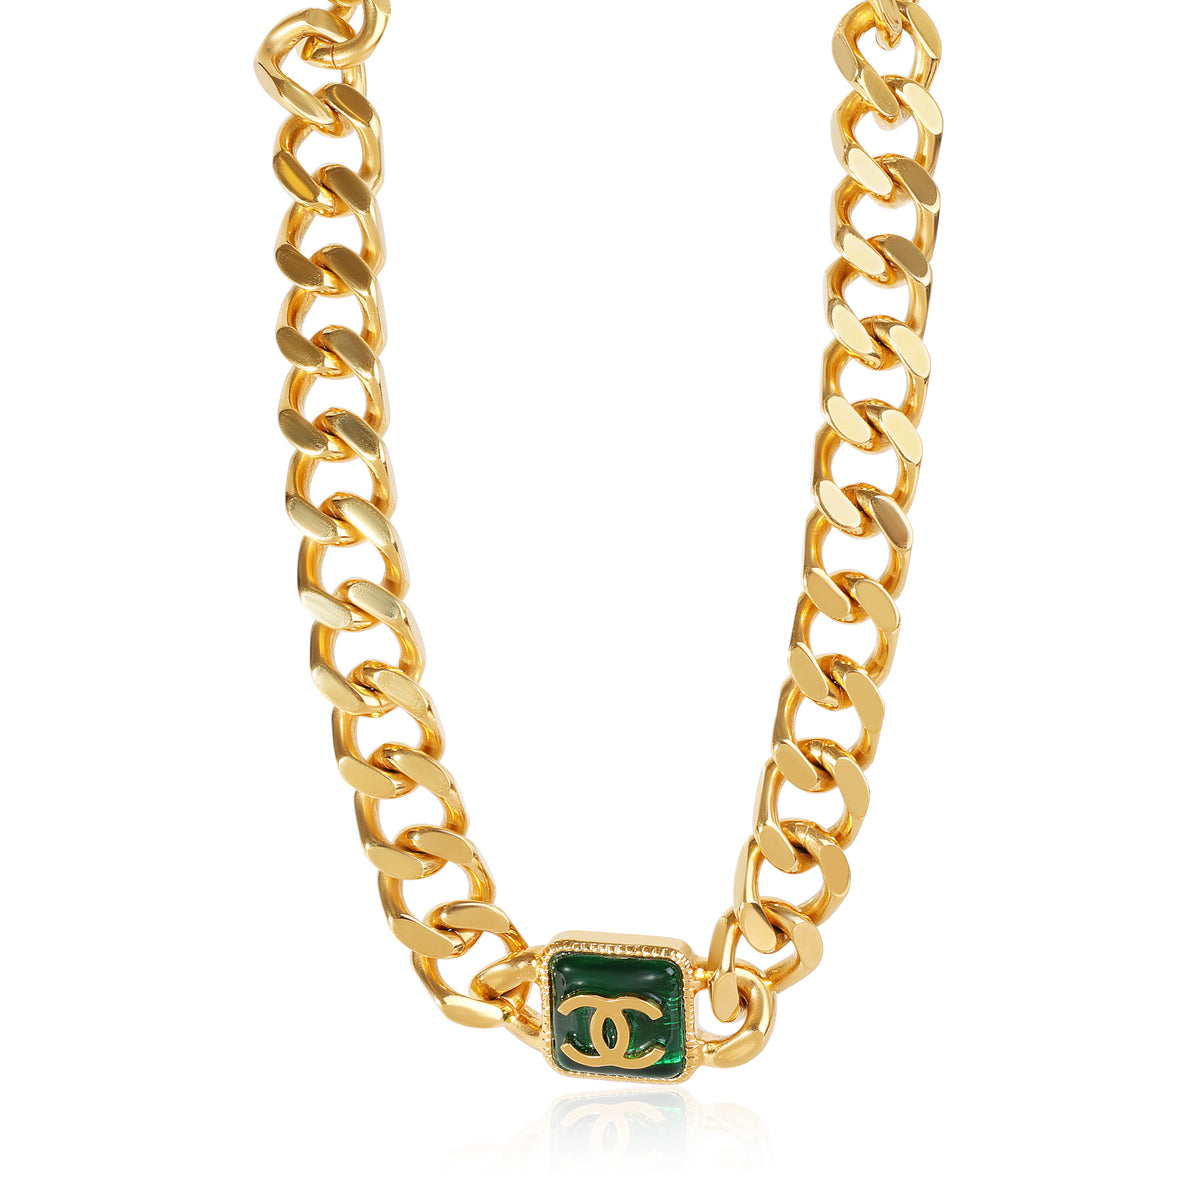 CHANEL+100+Anniversary+Pearl+Necklace+Choker+Gold+Metal+CC+Classic